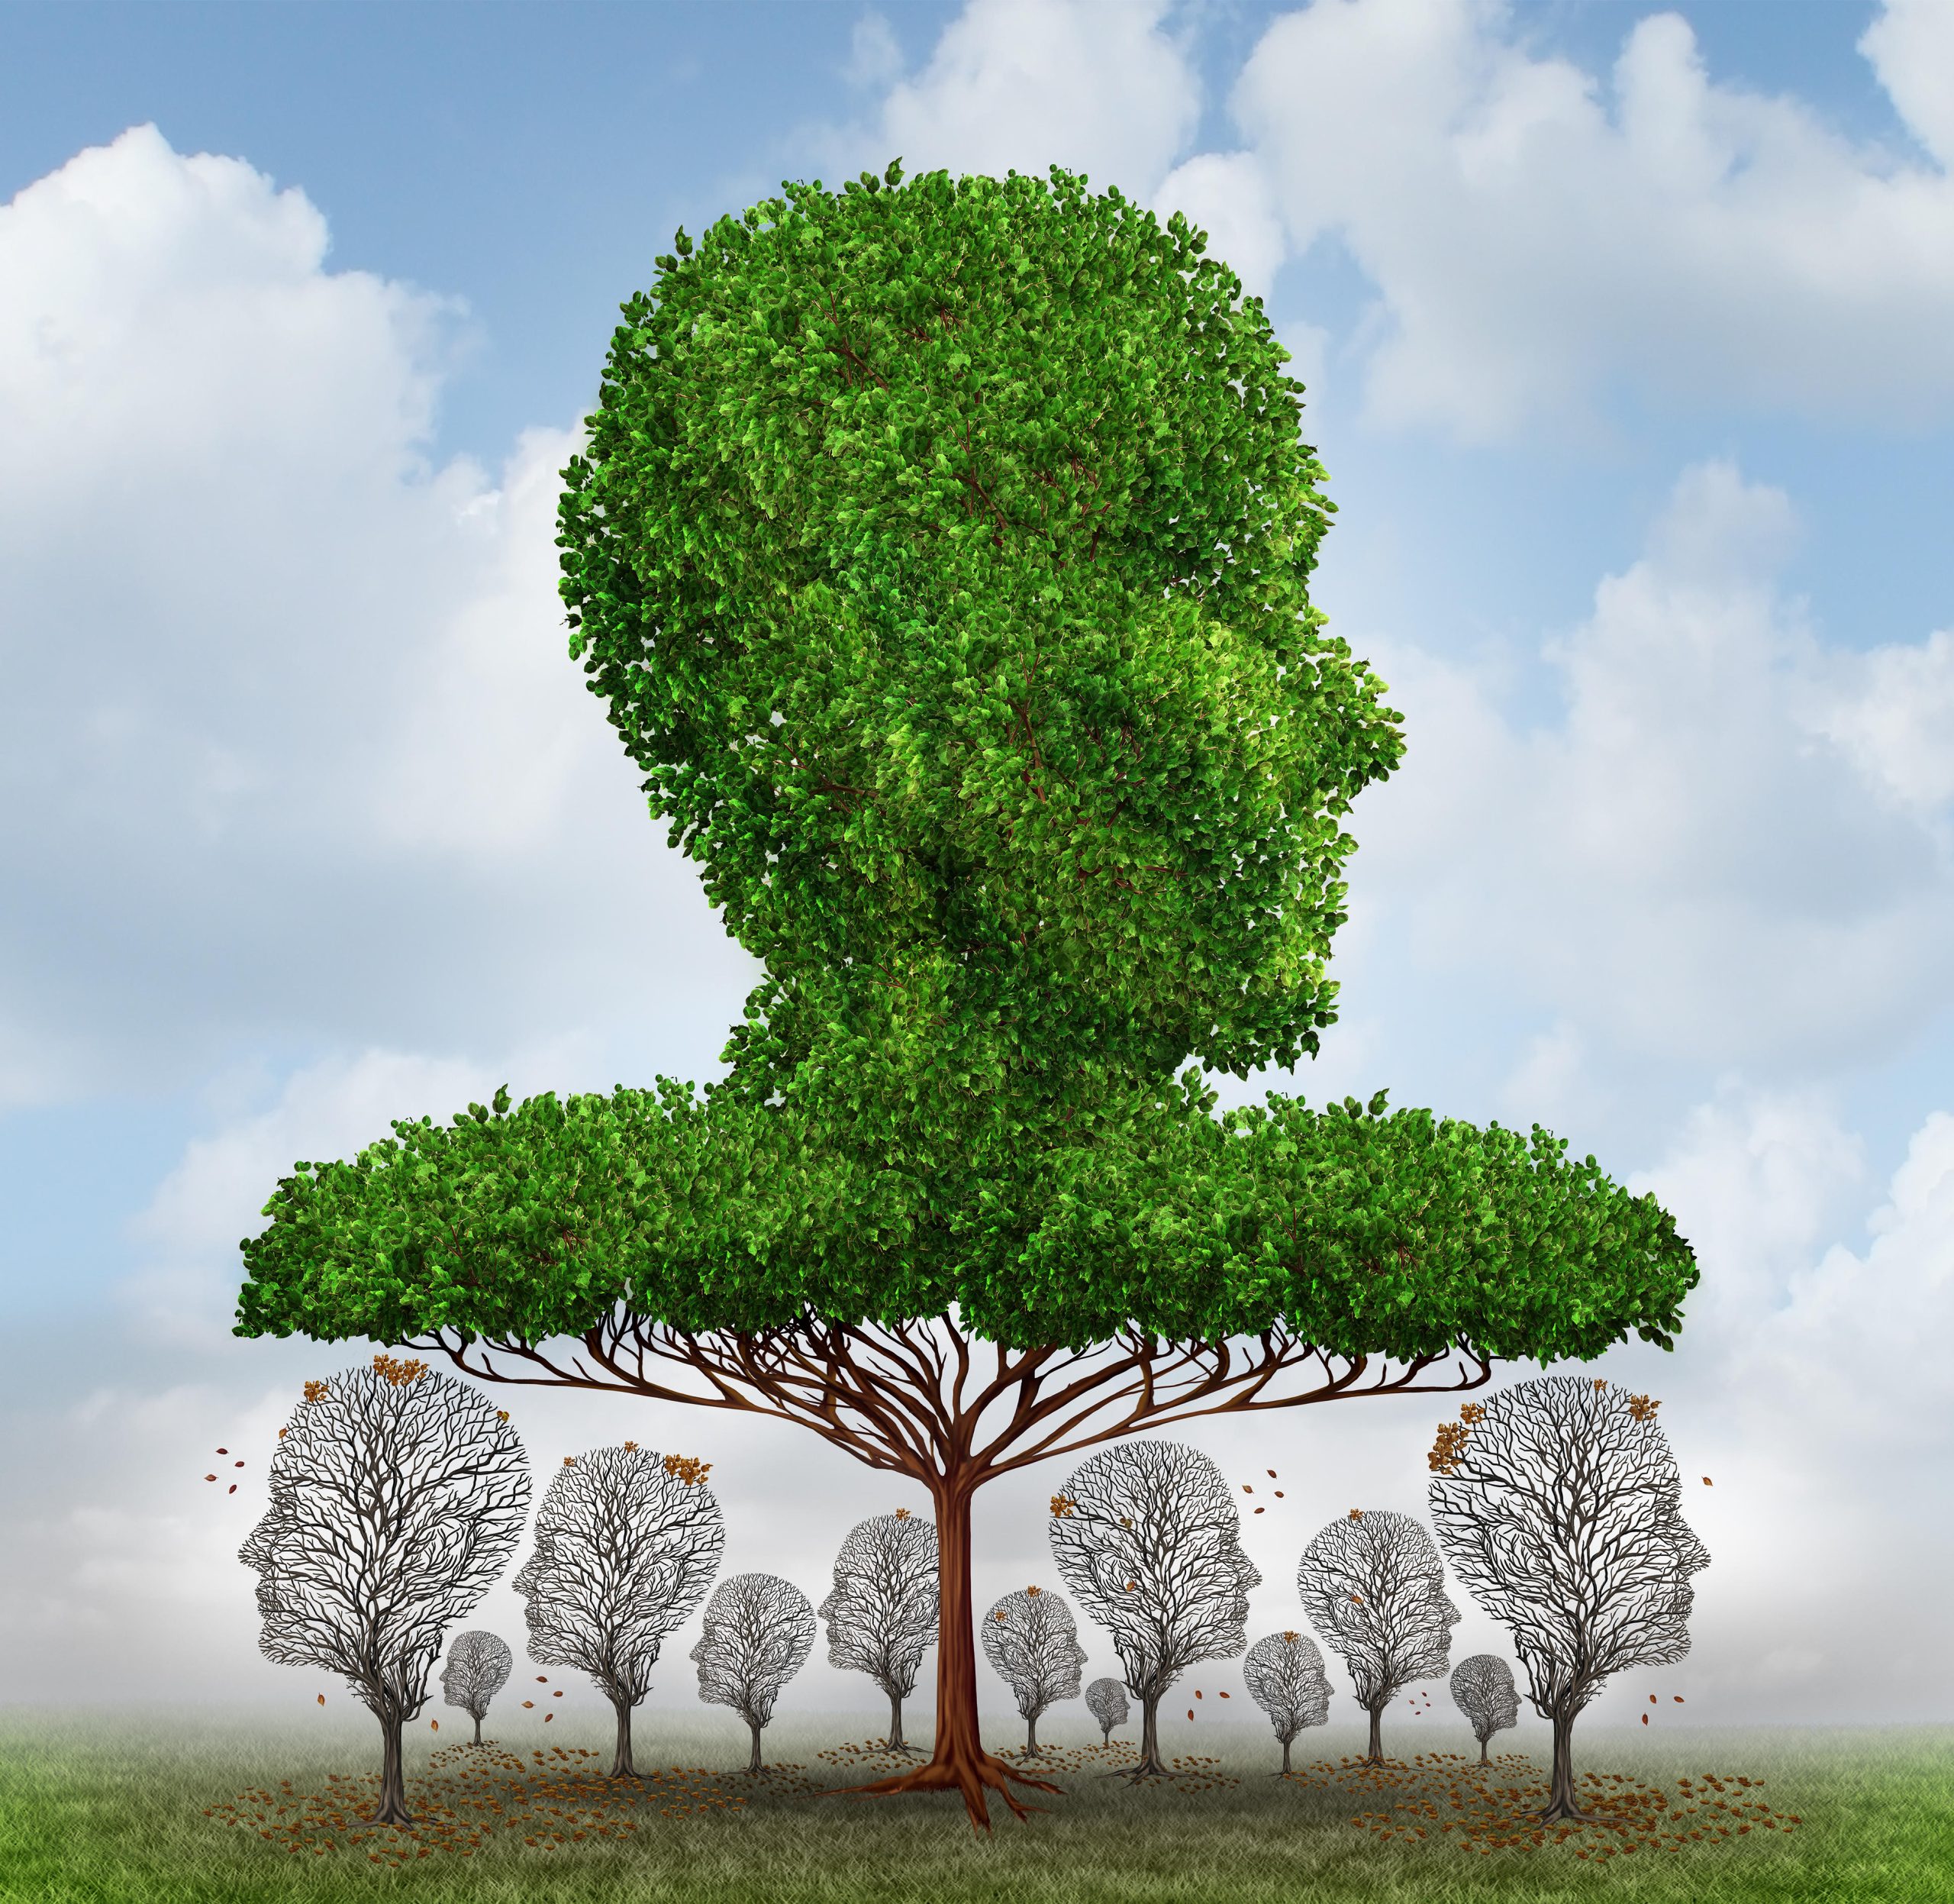 A symbollic illustration depicting economic and social inequality—a giant tree as a human head casting shadow on smaller leafless trees below. Source: Brain light/Alamy via Reuters.